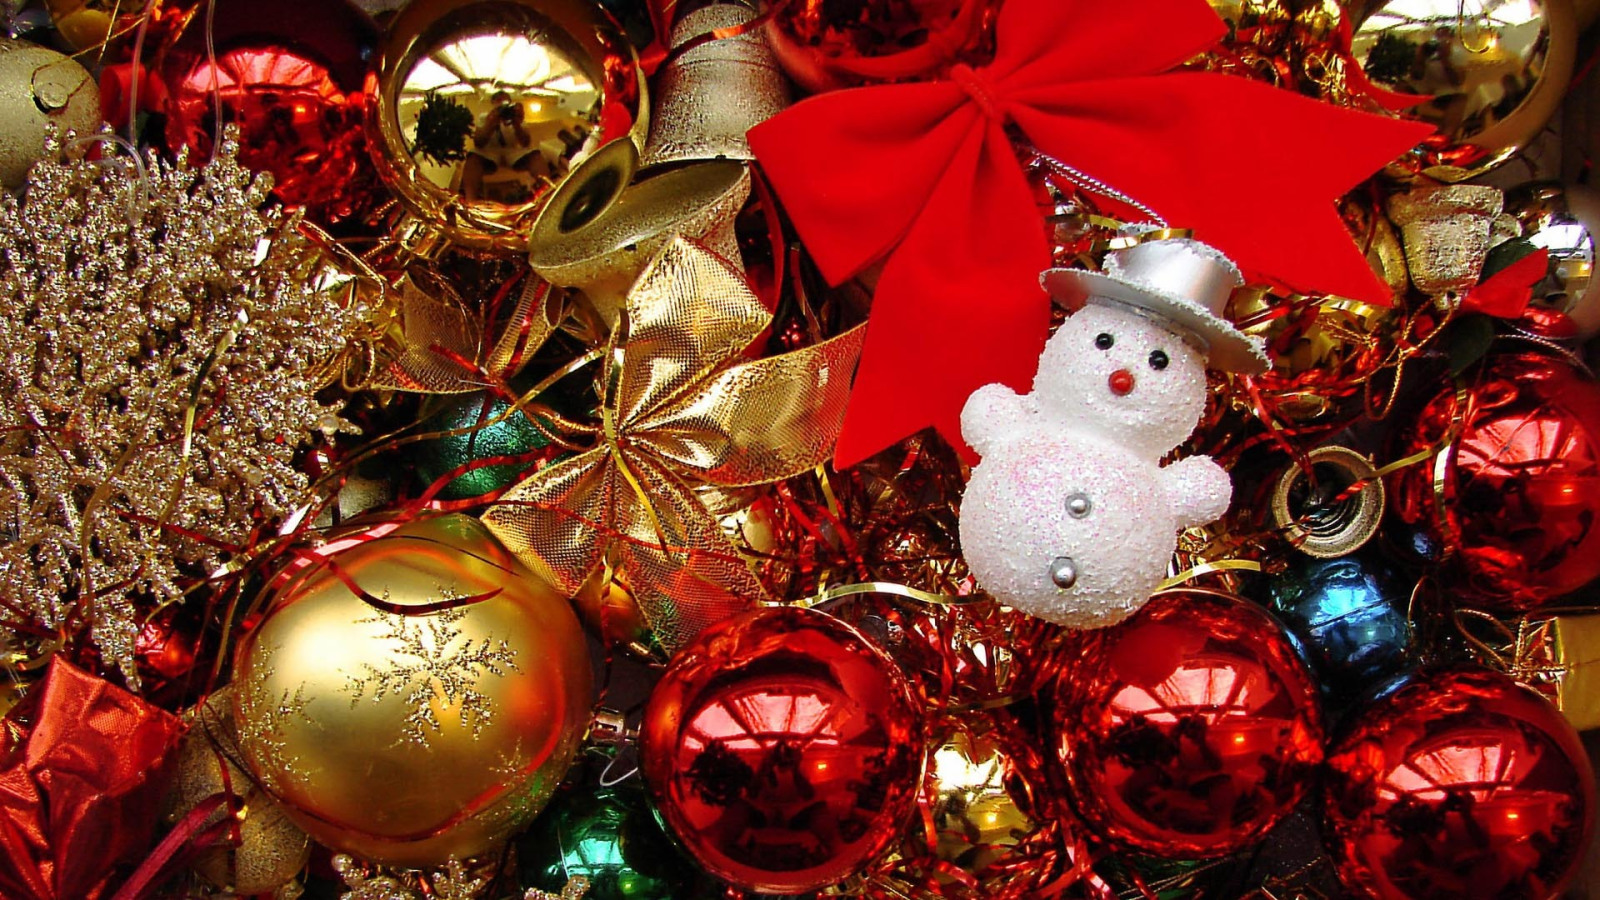 Red And White Christmas Ornaments  Wallpapers13com